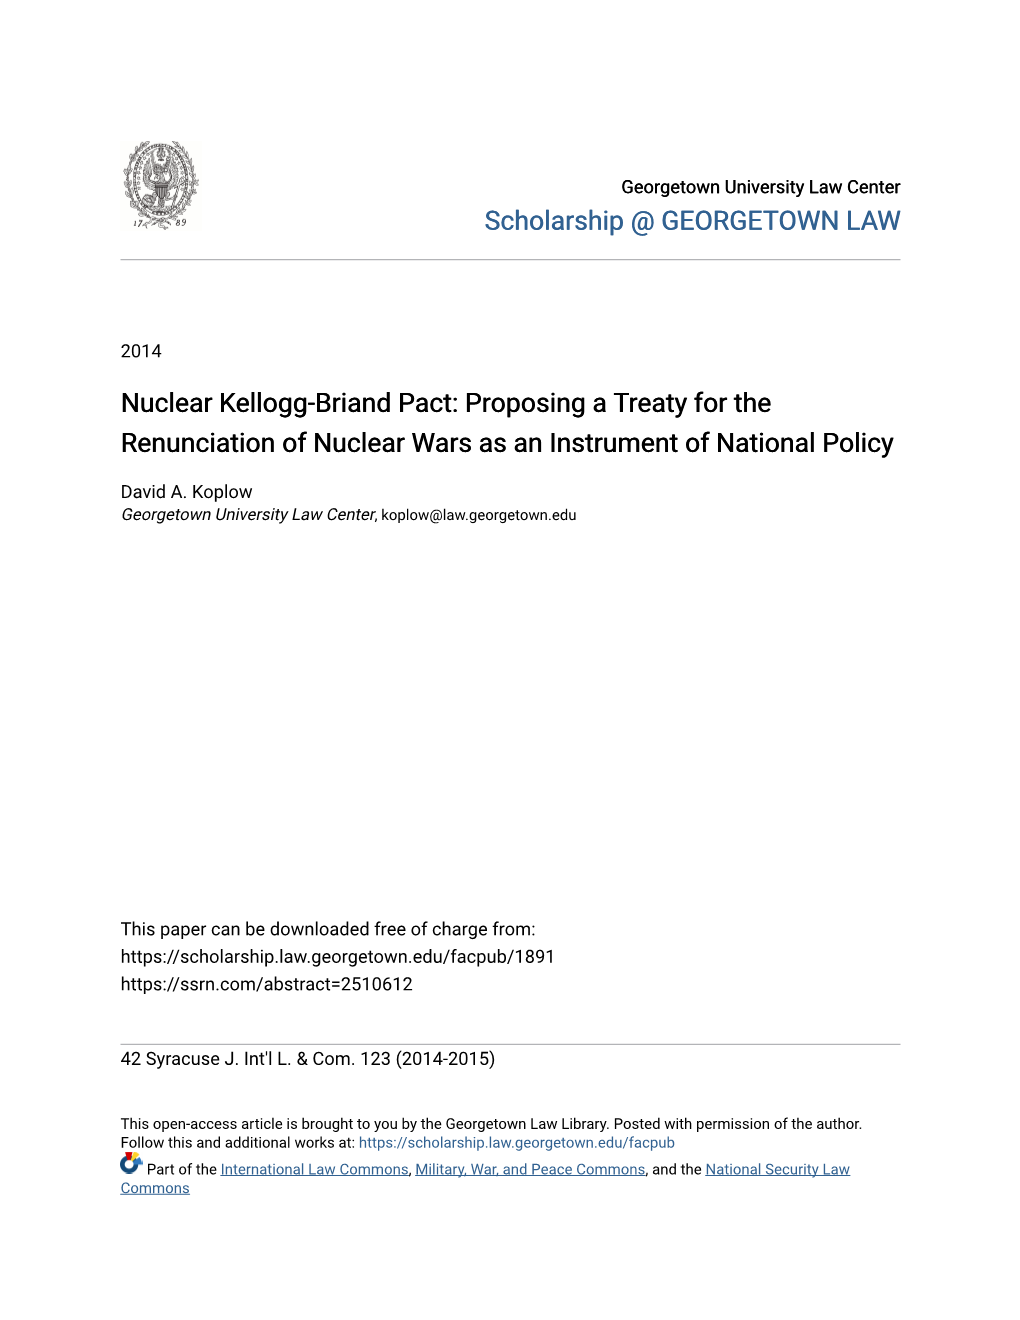 Nuclear Kellogg-Briand Pact: Proposing a Treaty for the Renunciation of Nuclear Wars As an Instrument of National Policy